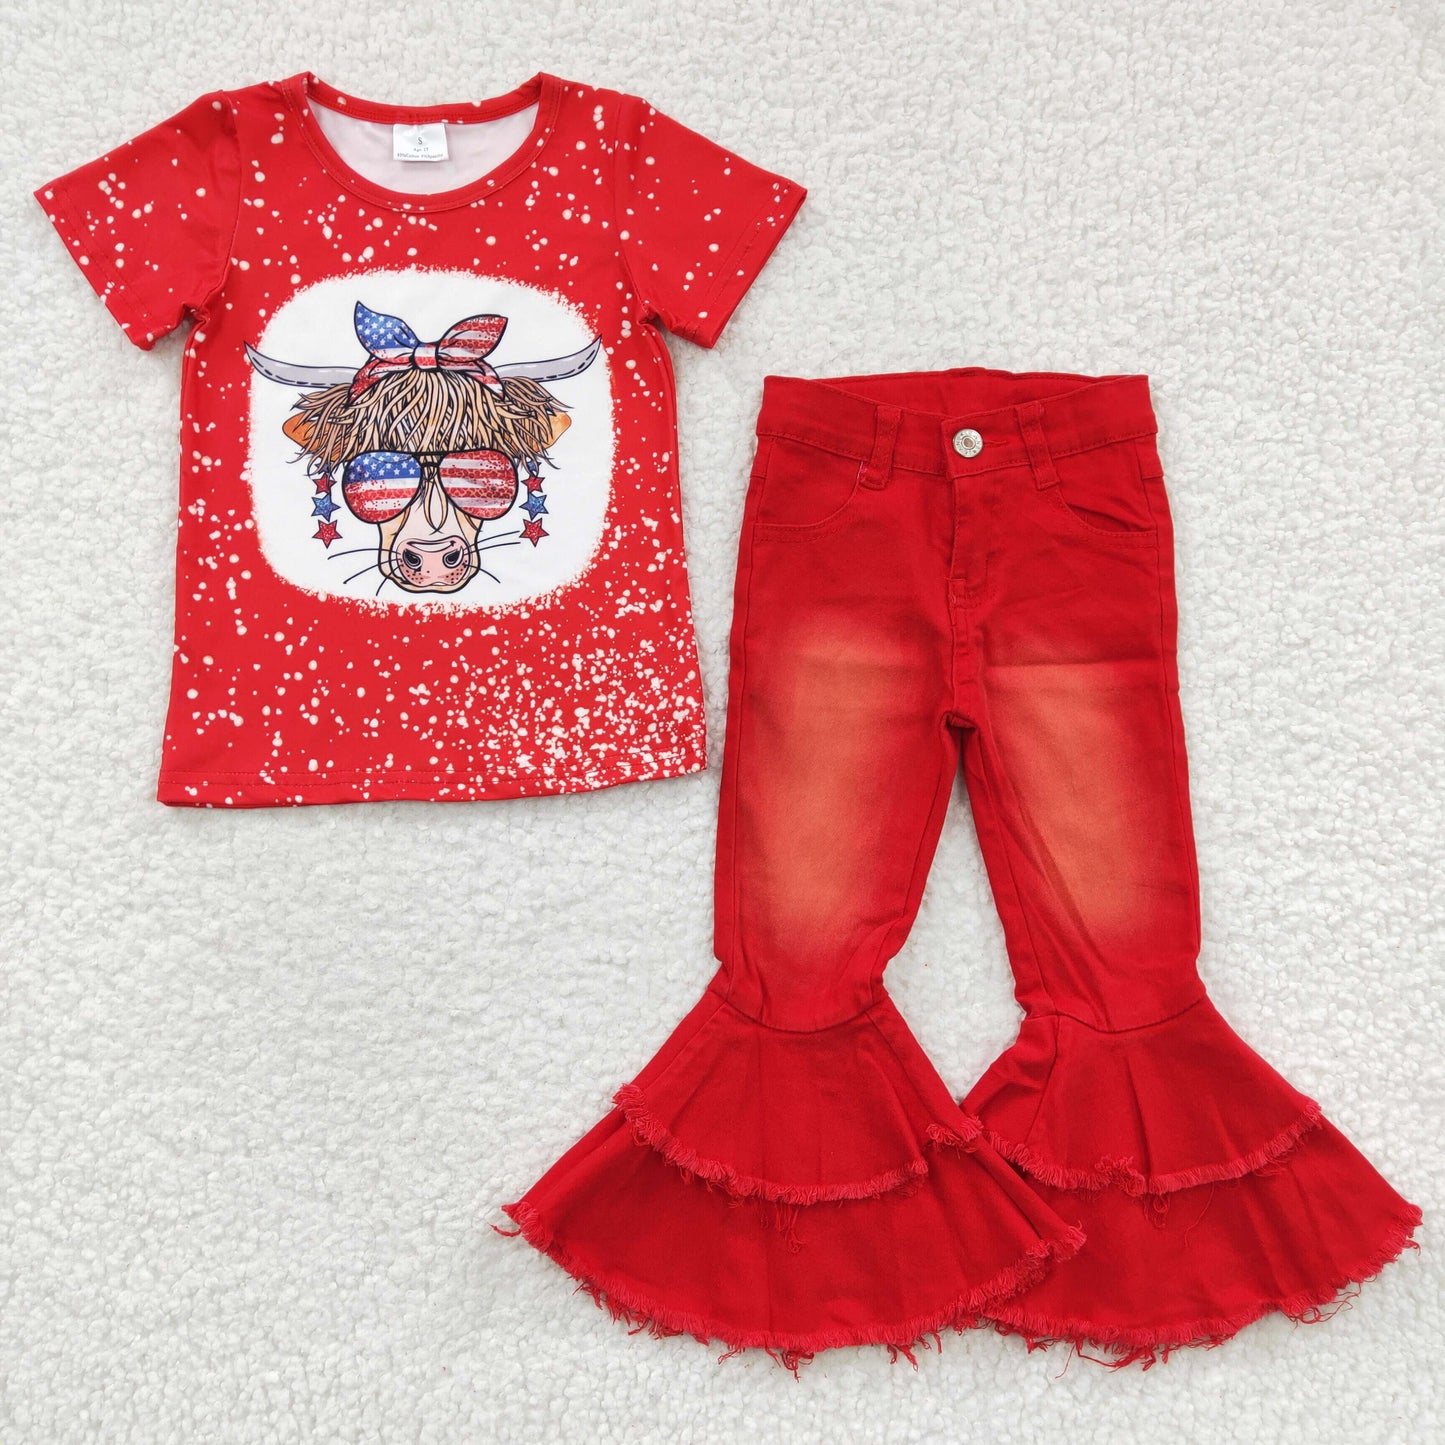 GSPO0541 July 4th Red Hignland Cow Top Red Denim Pants Set